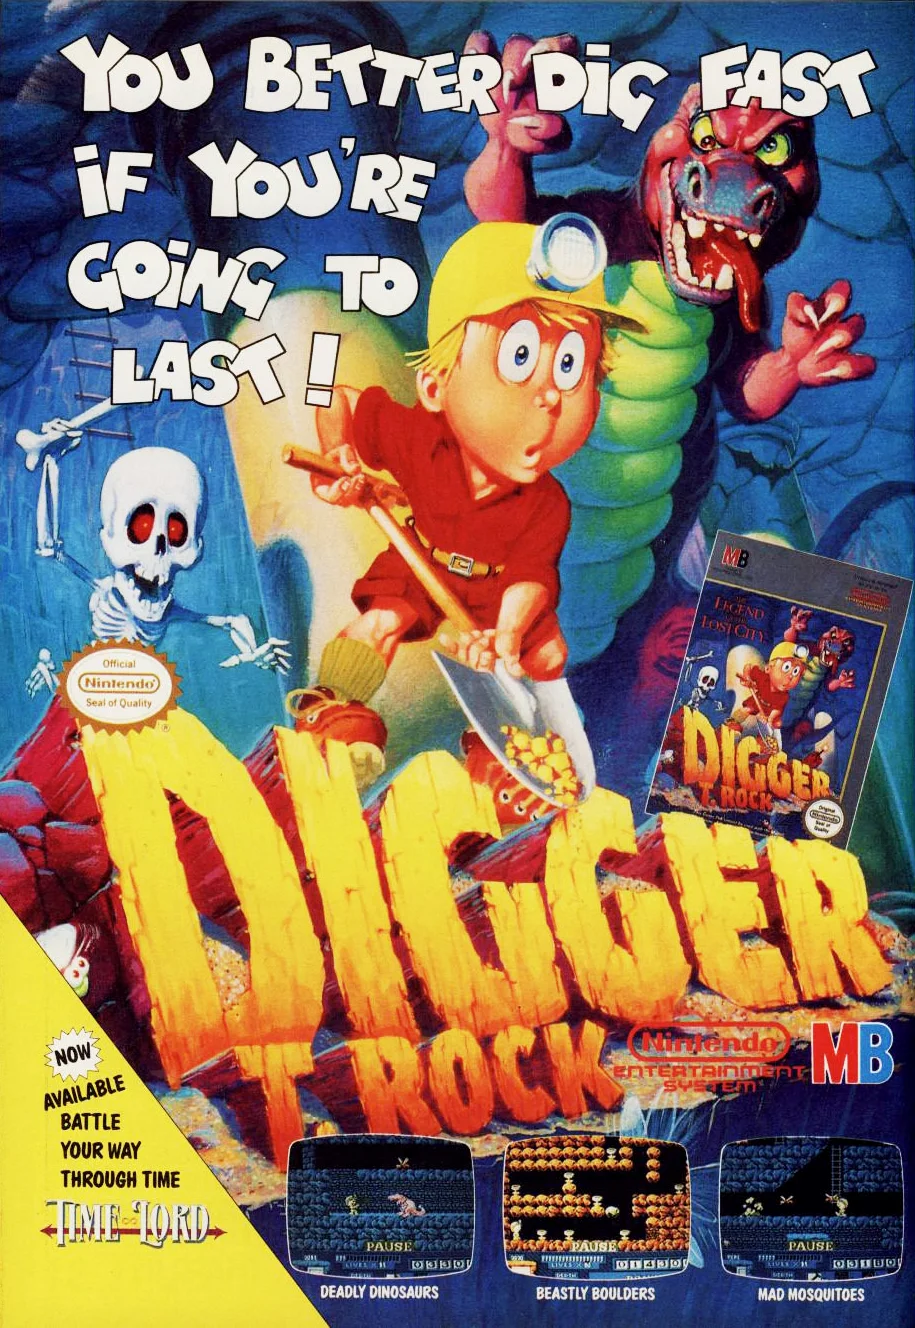 Digger T. Rock: Legend of the Lost City